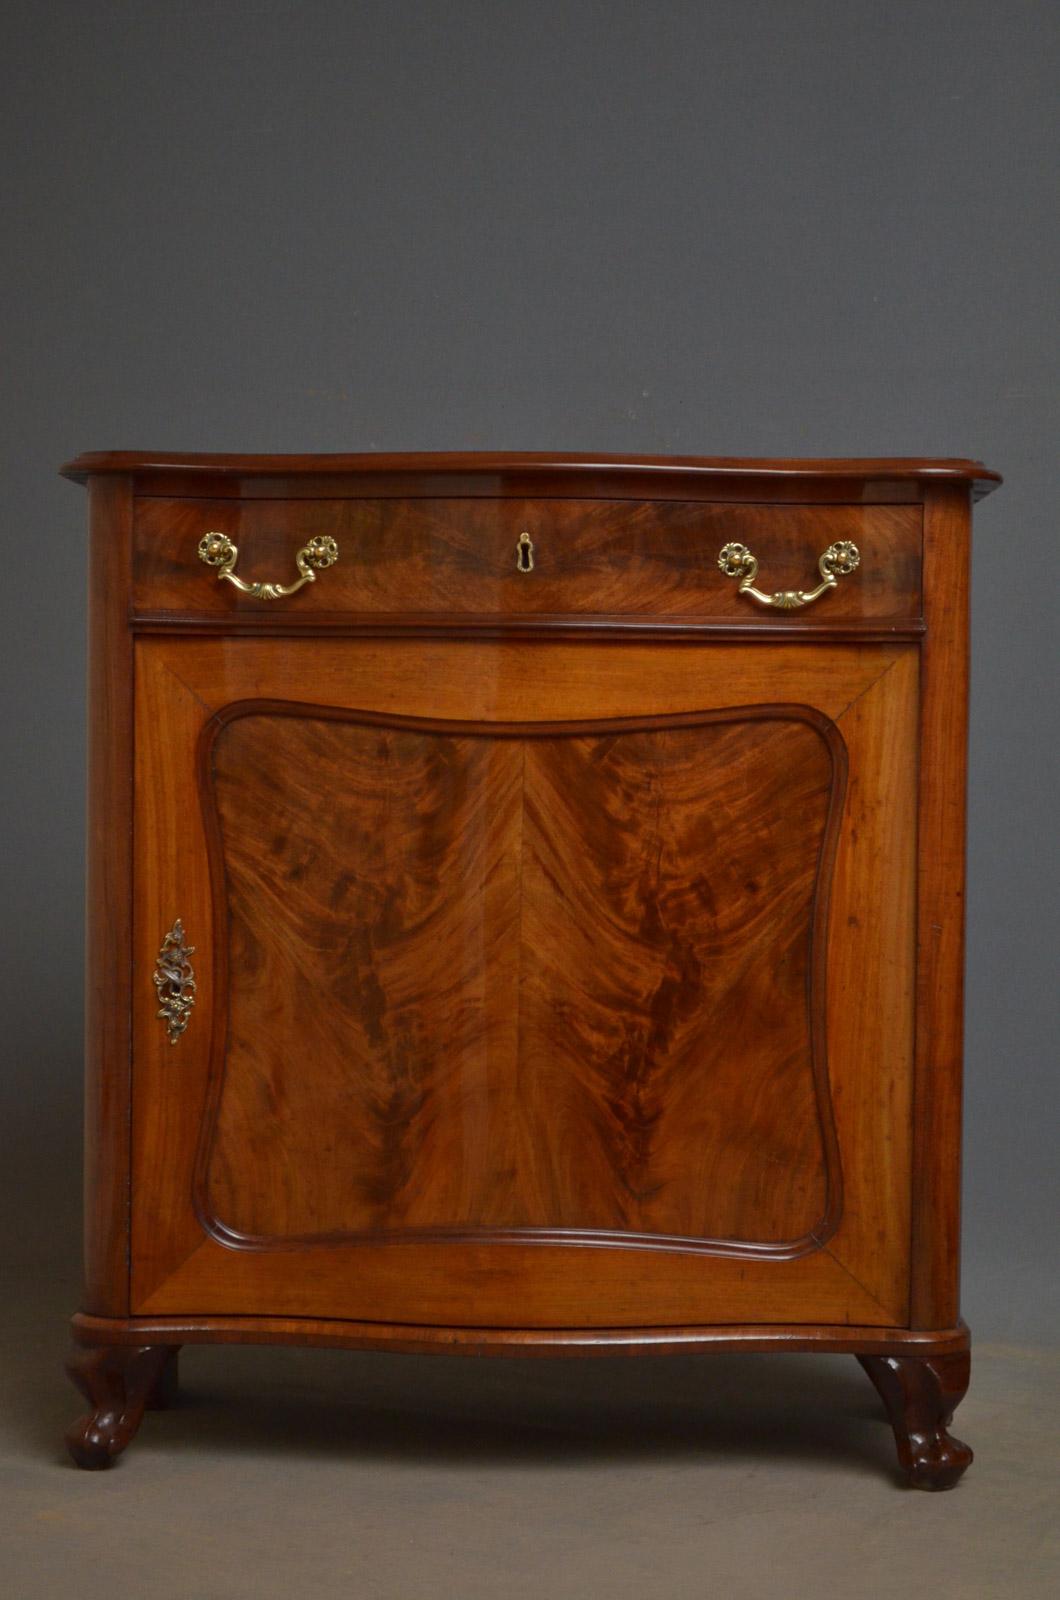 Sn4385, 19th century Continental chiffonier of diminutive proportions, having serpentine top above a drawer and paneled cupboard door enclosing a shelf, all fitted with brass handles, escutcheon and working lock with a key, standing on knurl feet.